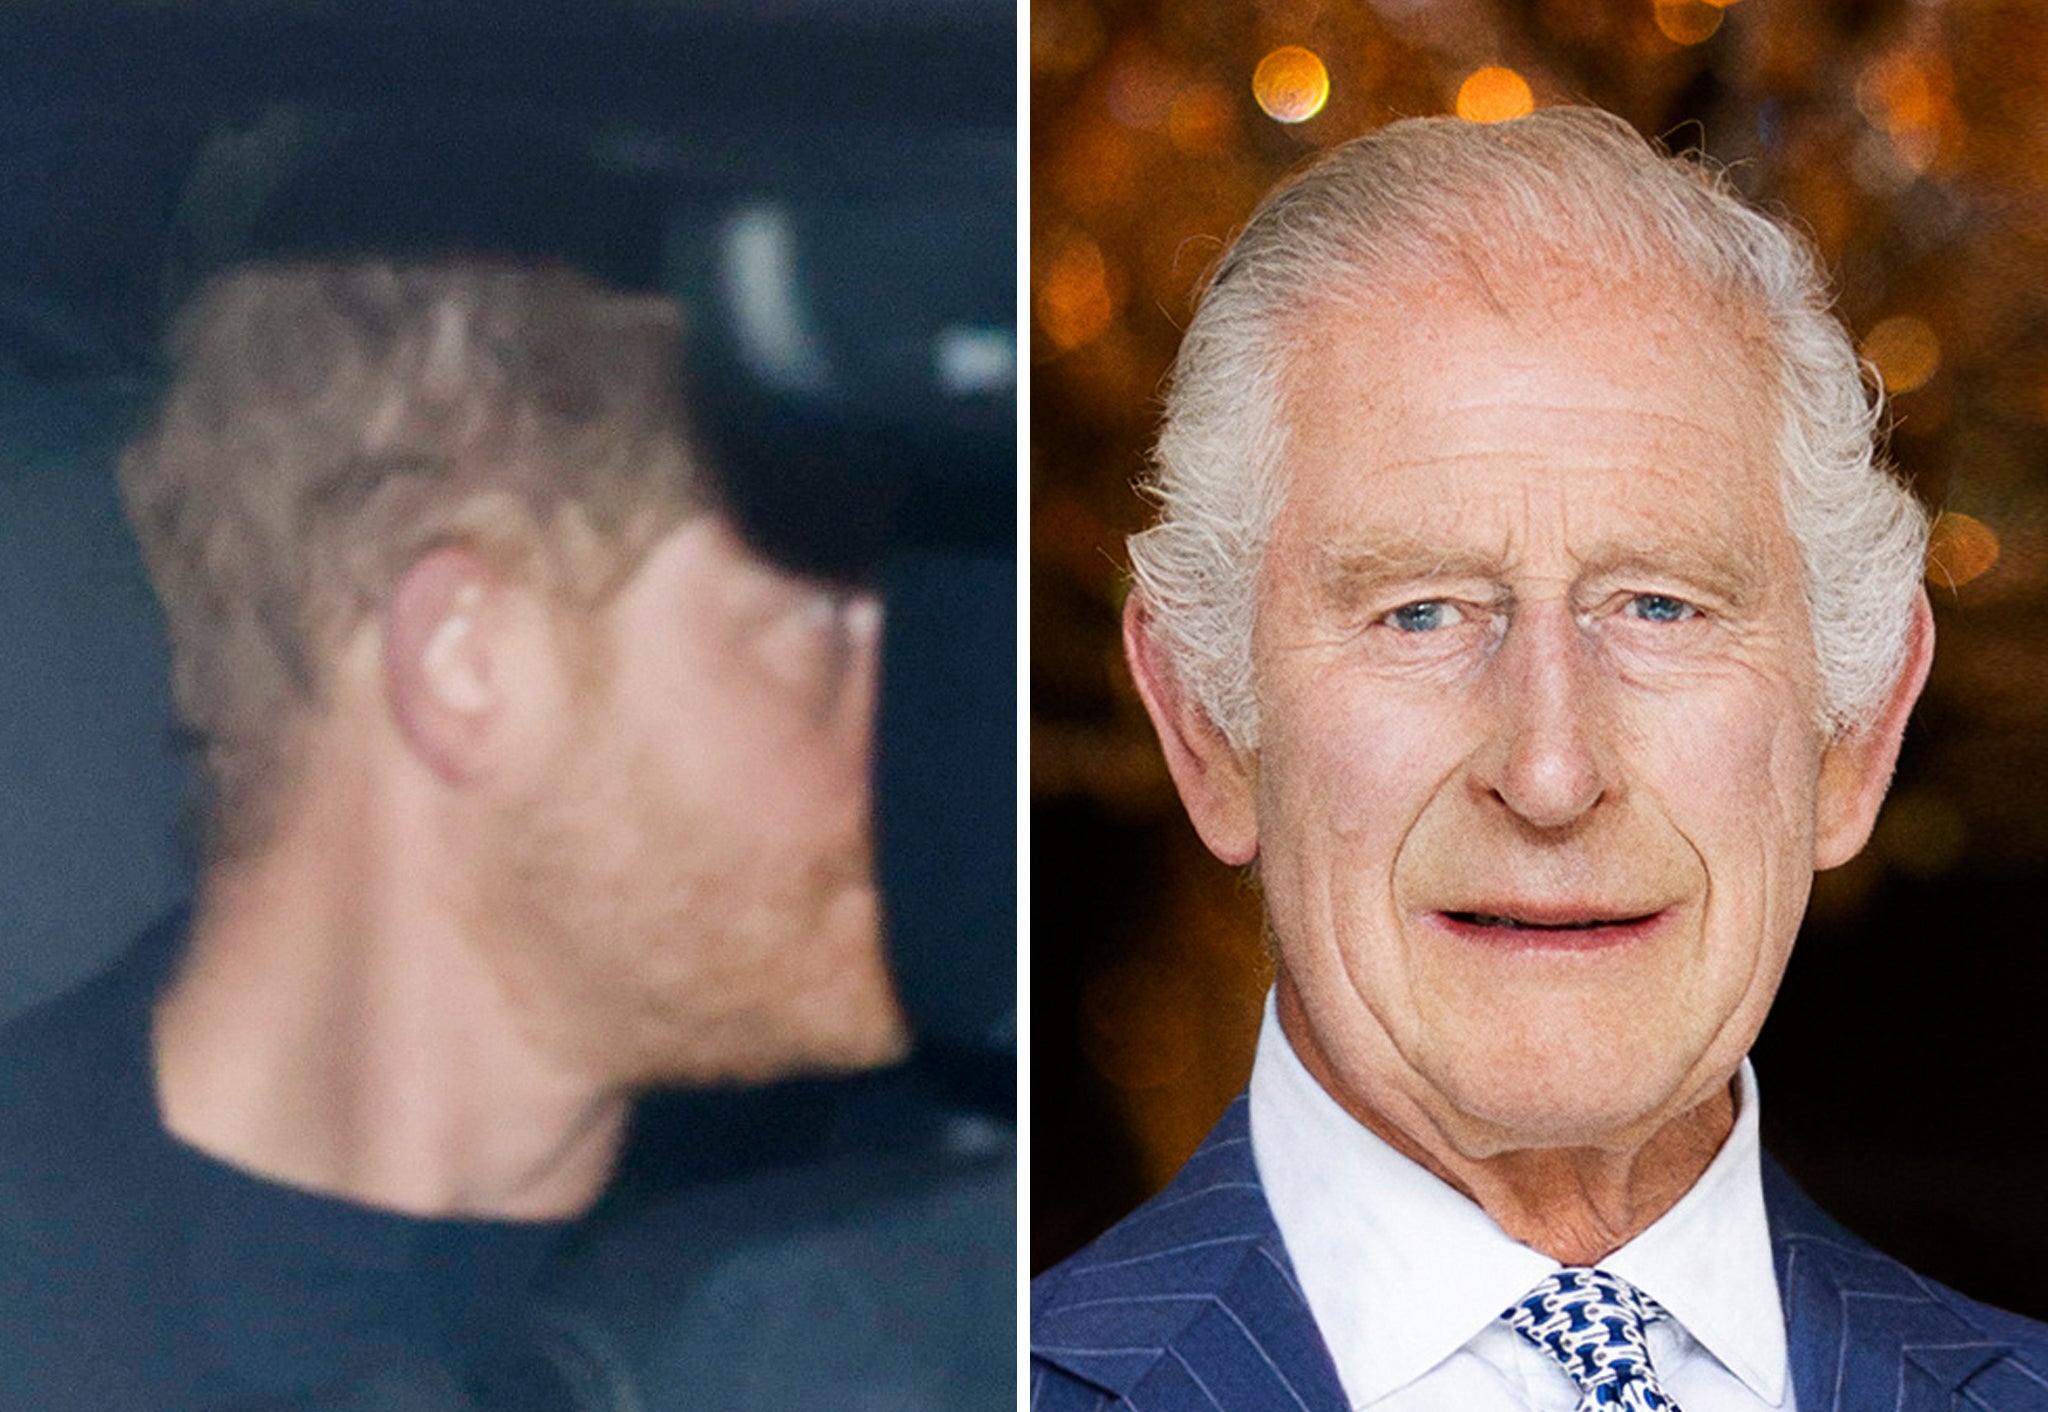 The royal outcast arrived at Clarence House for a 30-minute meeting with his father